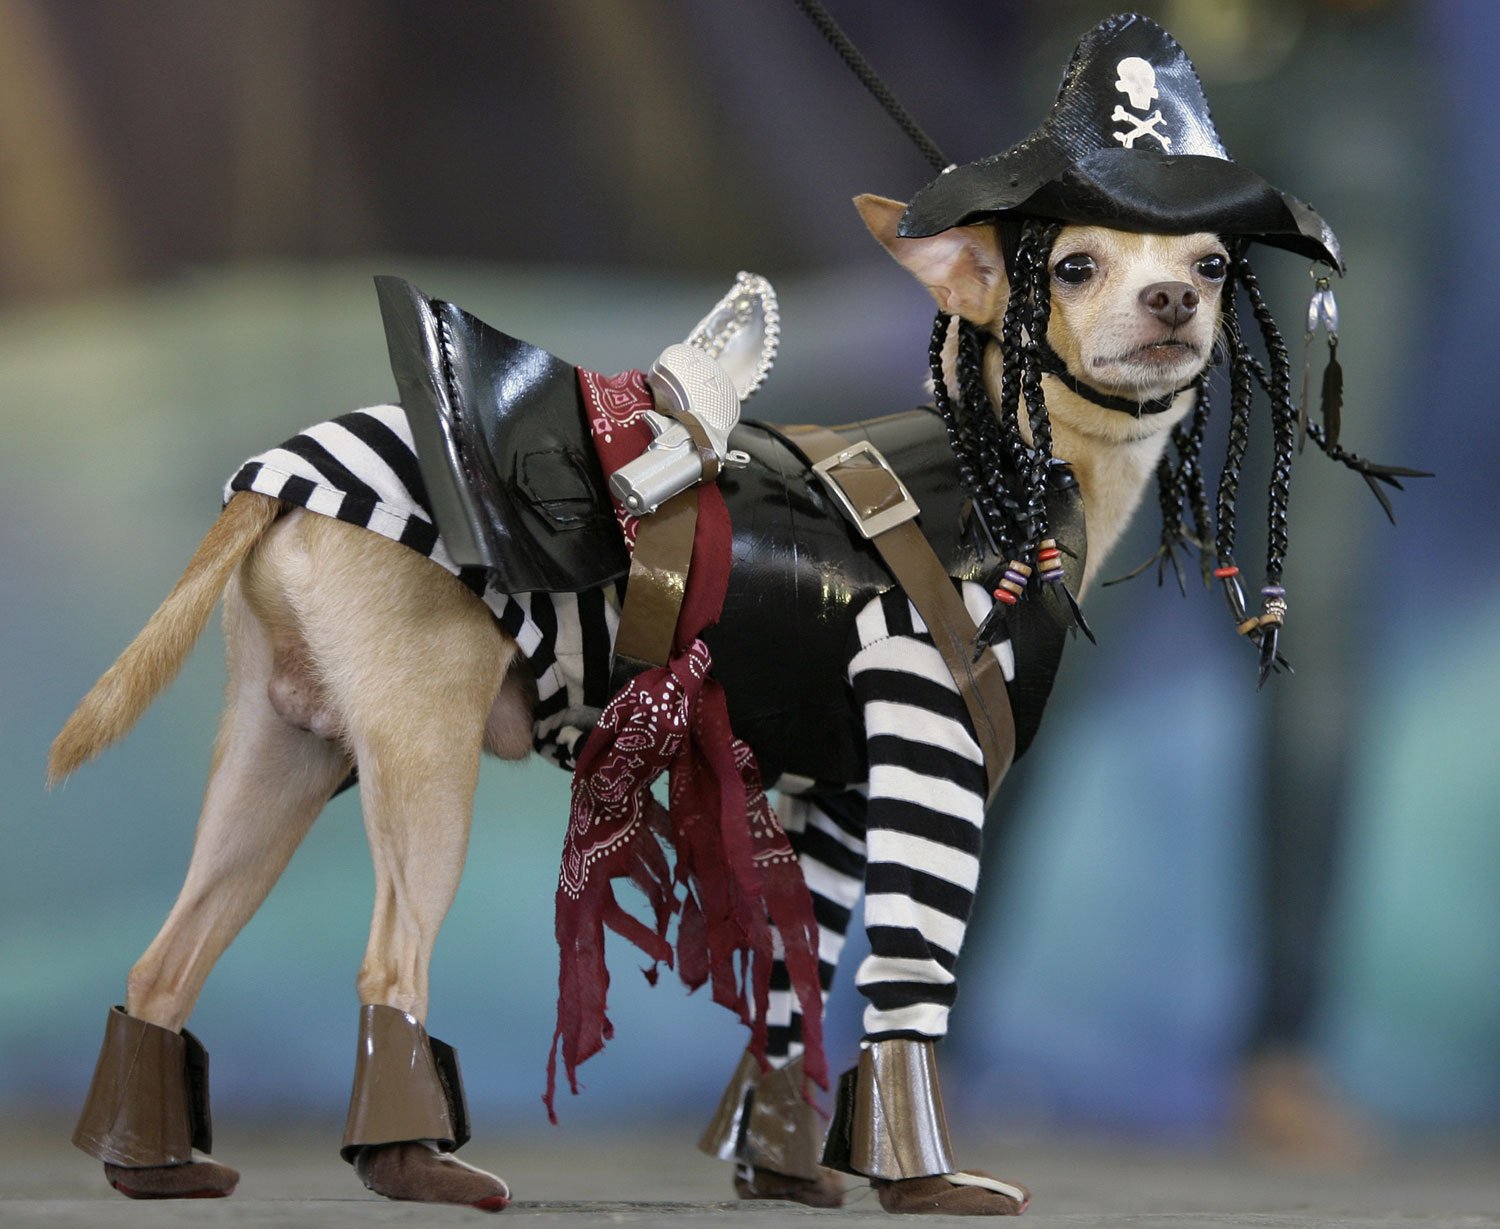  Mondex, a Chihuahua, wears a pirate costume during a Halloween dog show for the benefit of an animal welfare organization in Manila, Philippines, Sunday, Oct. 26, 2008. Mondex won the Creative Costume award. (AP Photo/Aaron Favila) 